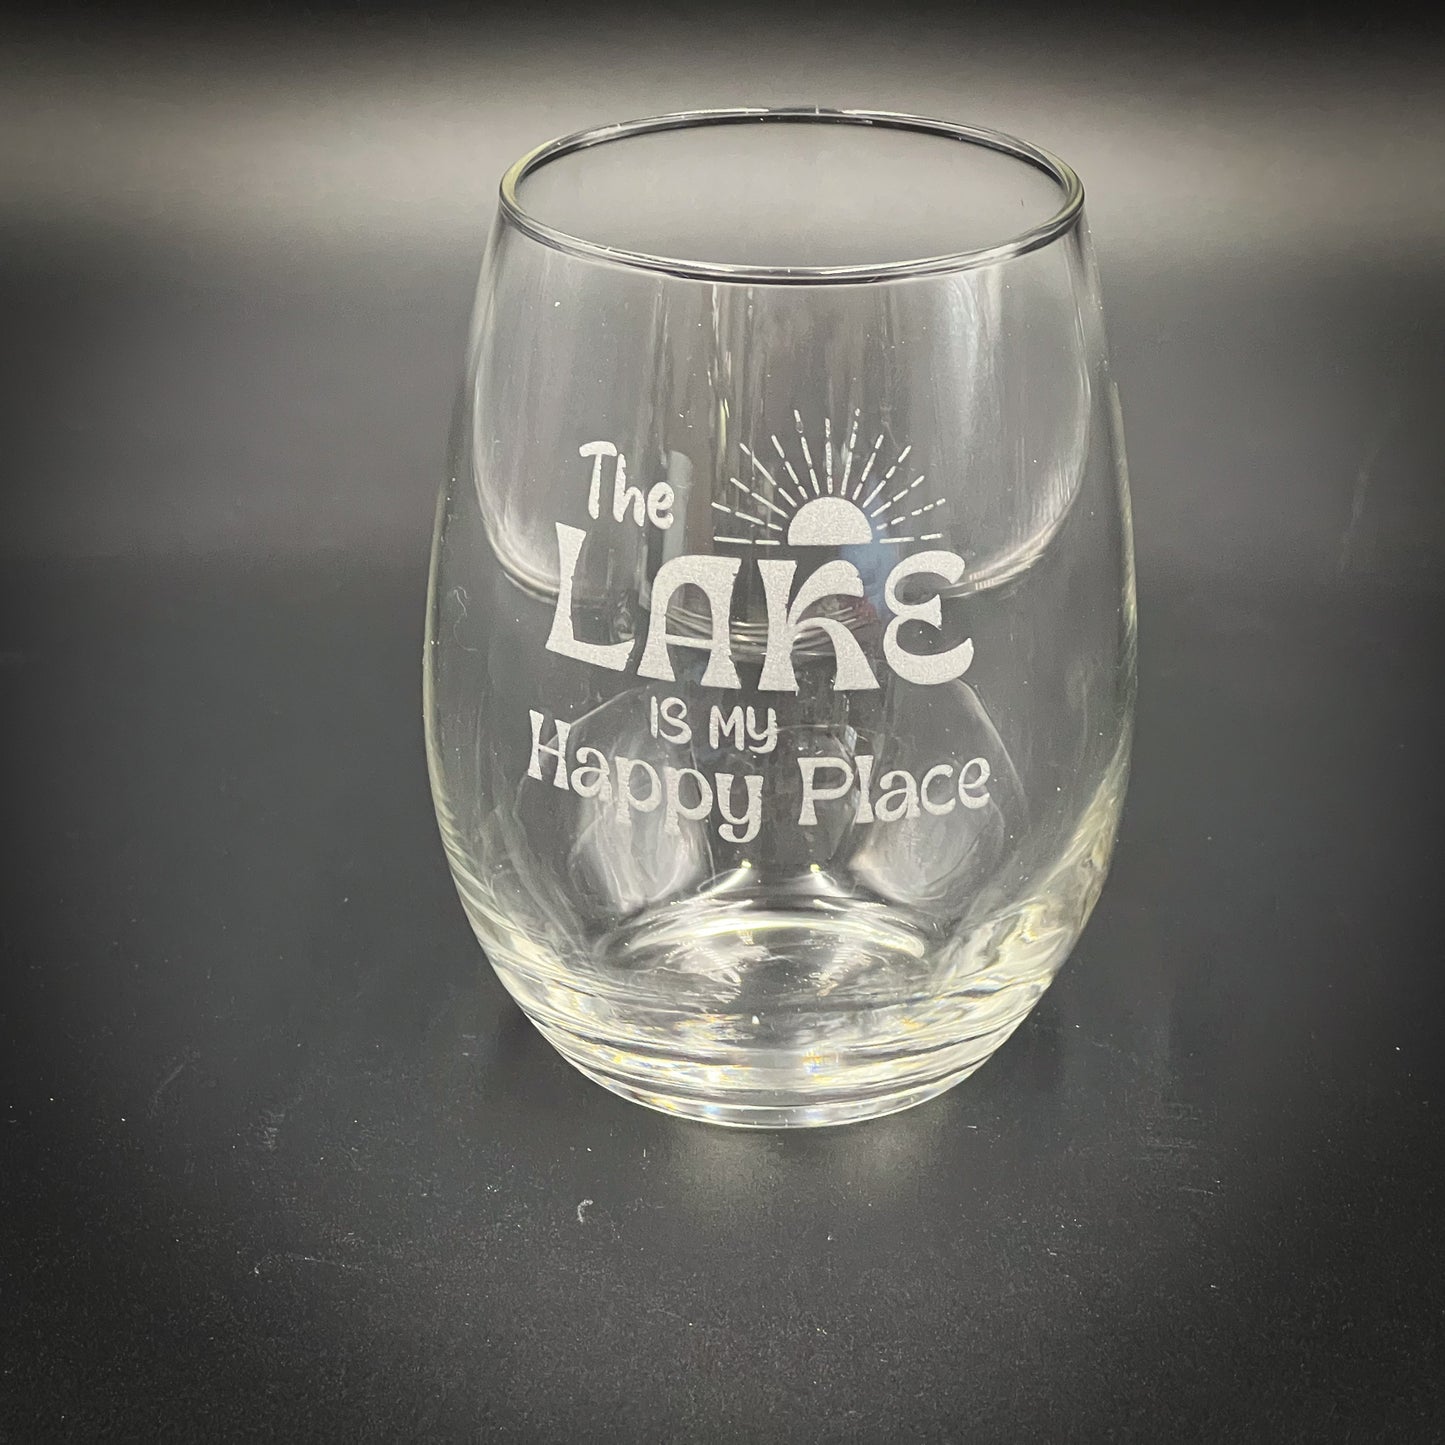 The Lake is my Happy Place - 15 oz Stemless